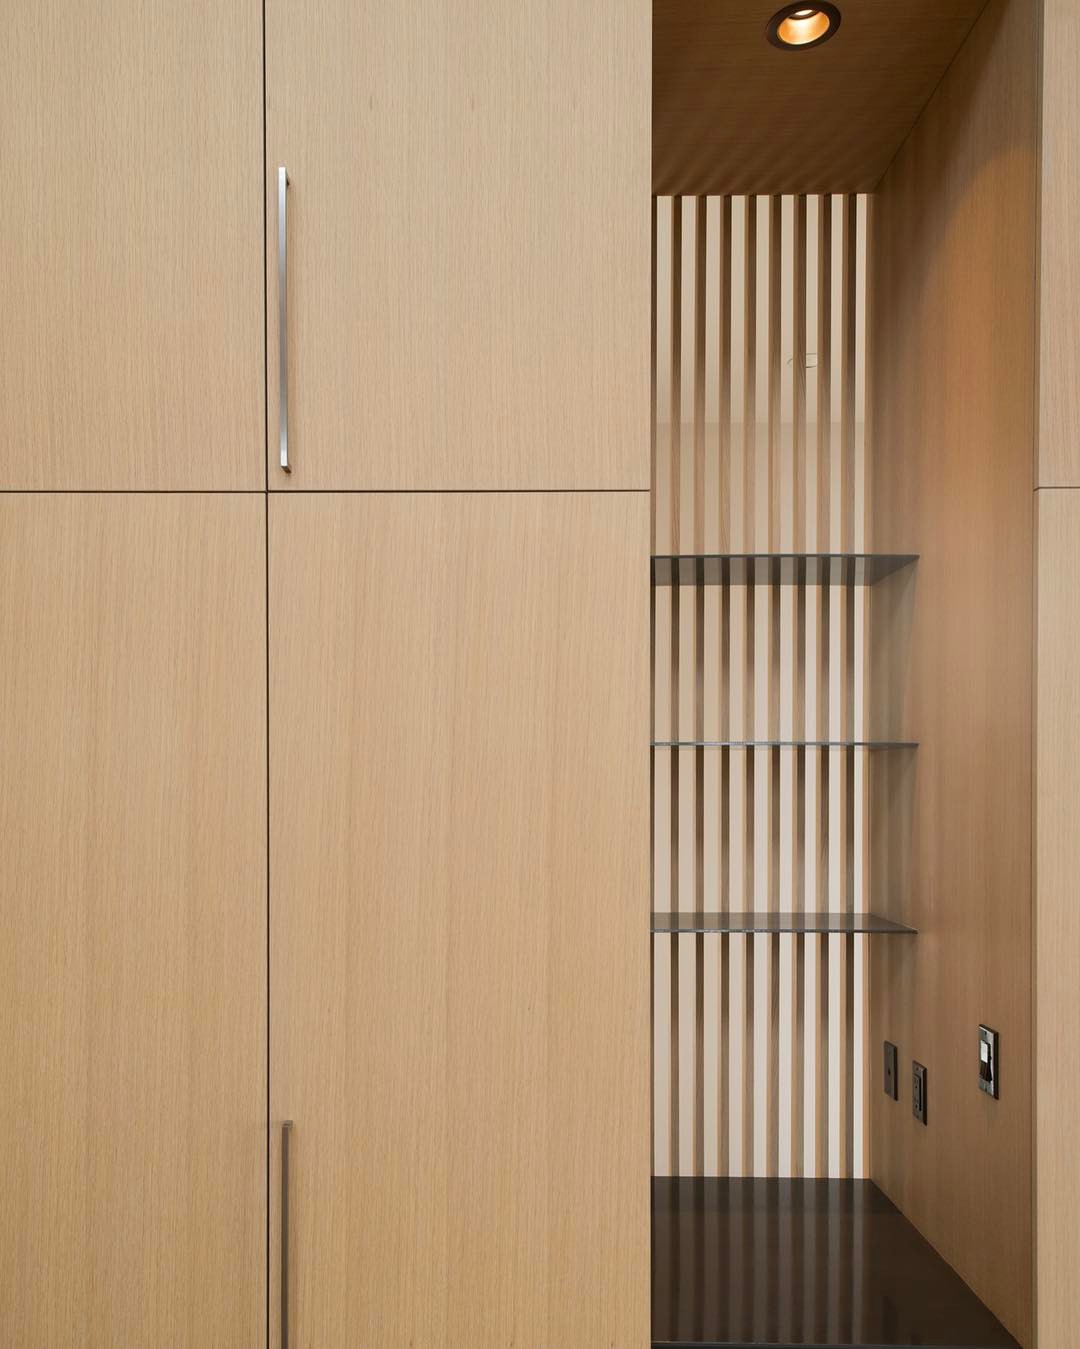 Sequenced and matched vertical grain white oak make for great cabinerty. Built by @foursquarebuilders Designed by @aparallel photo by @redpantsstudio